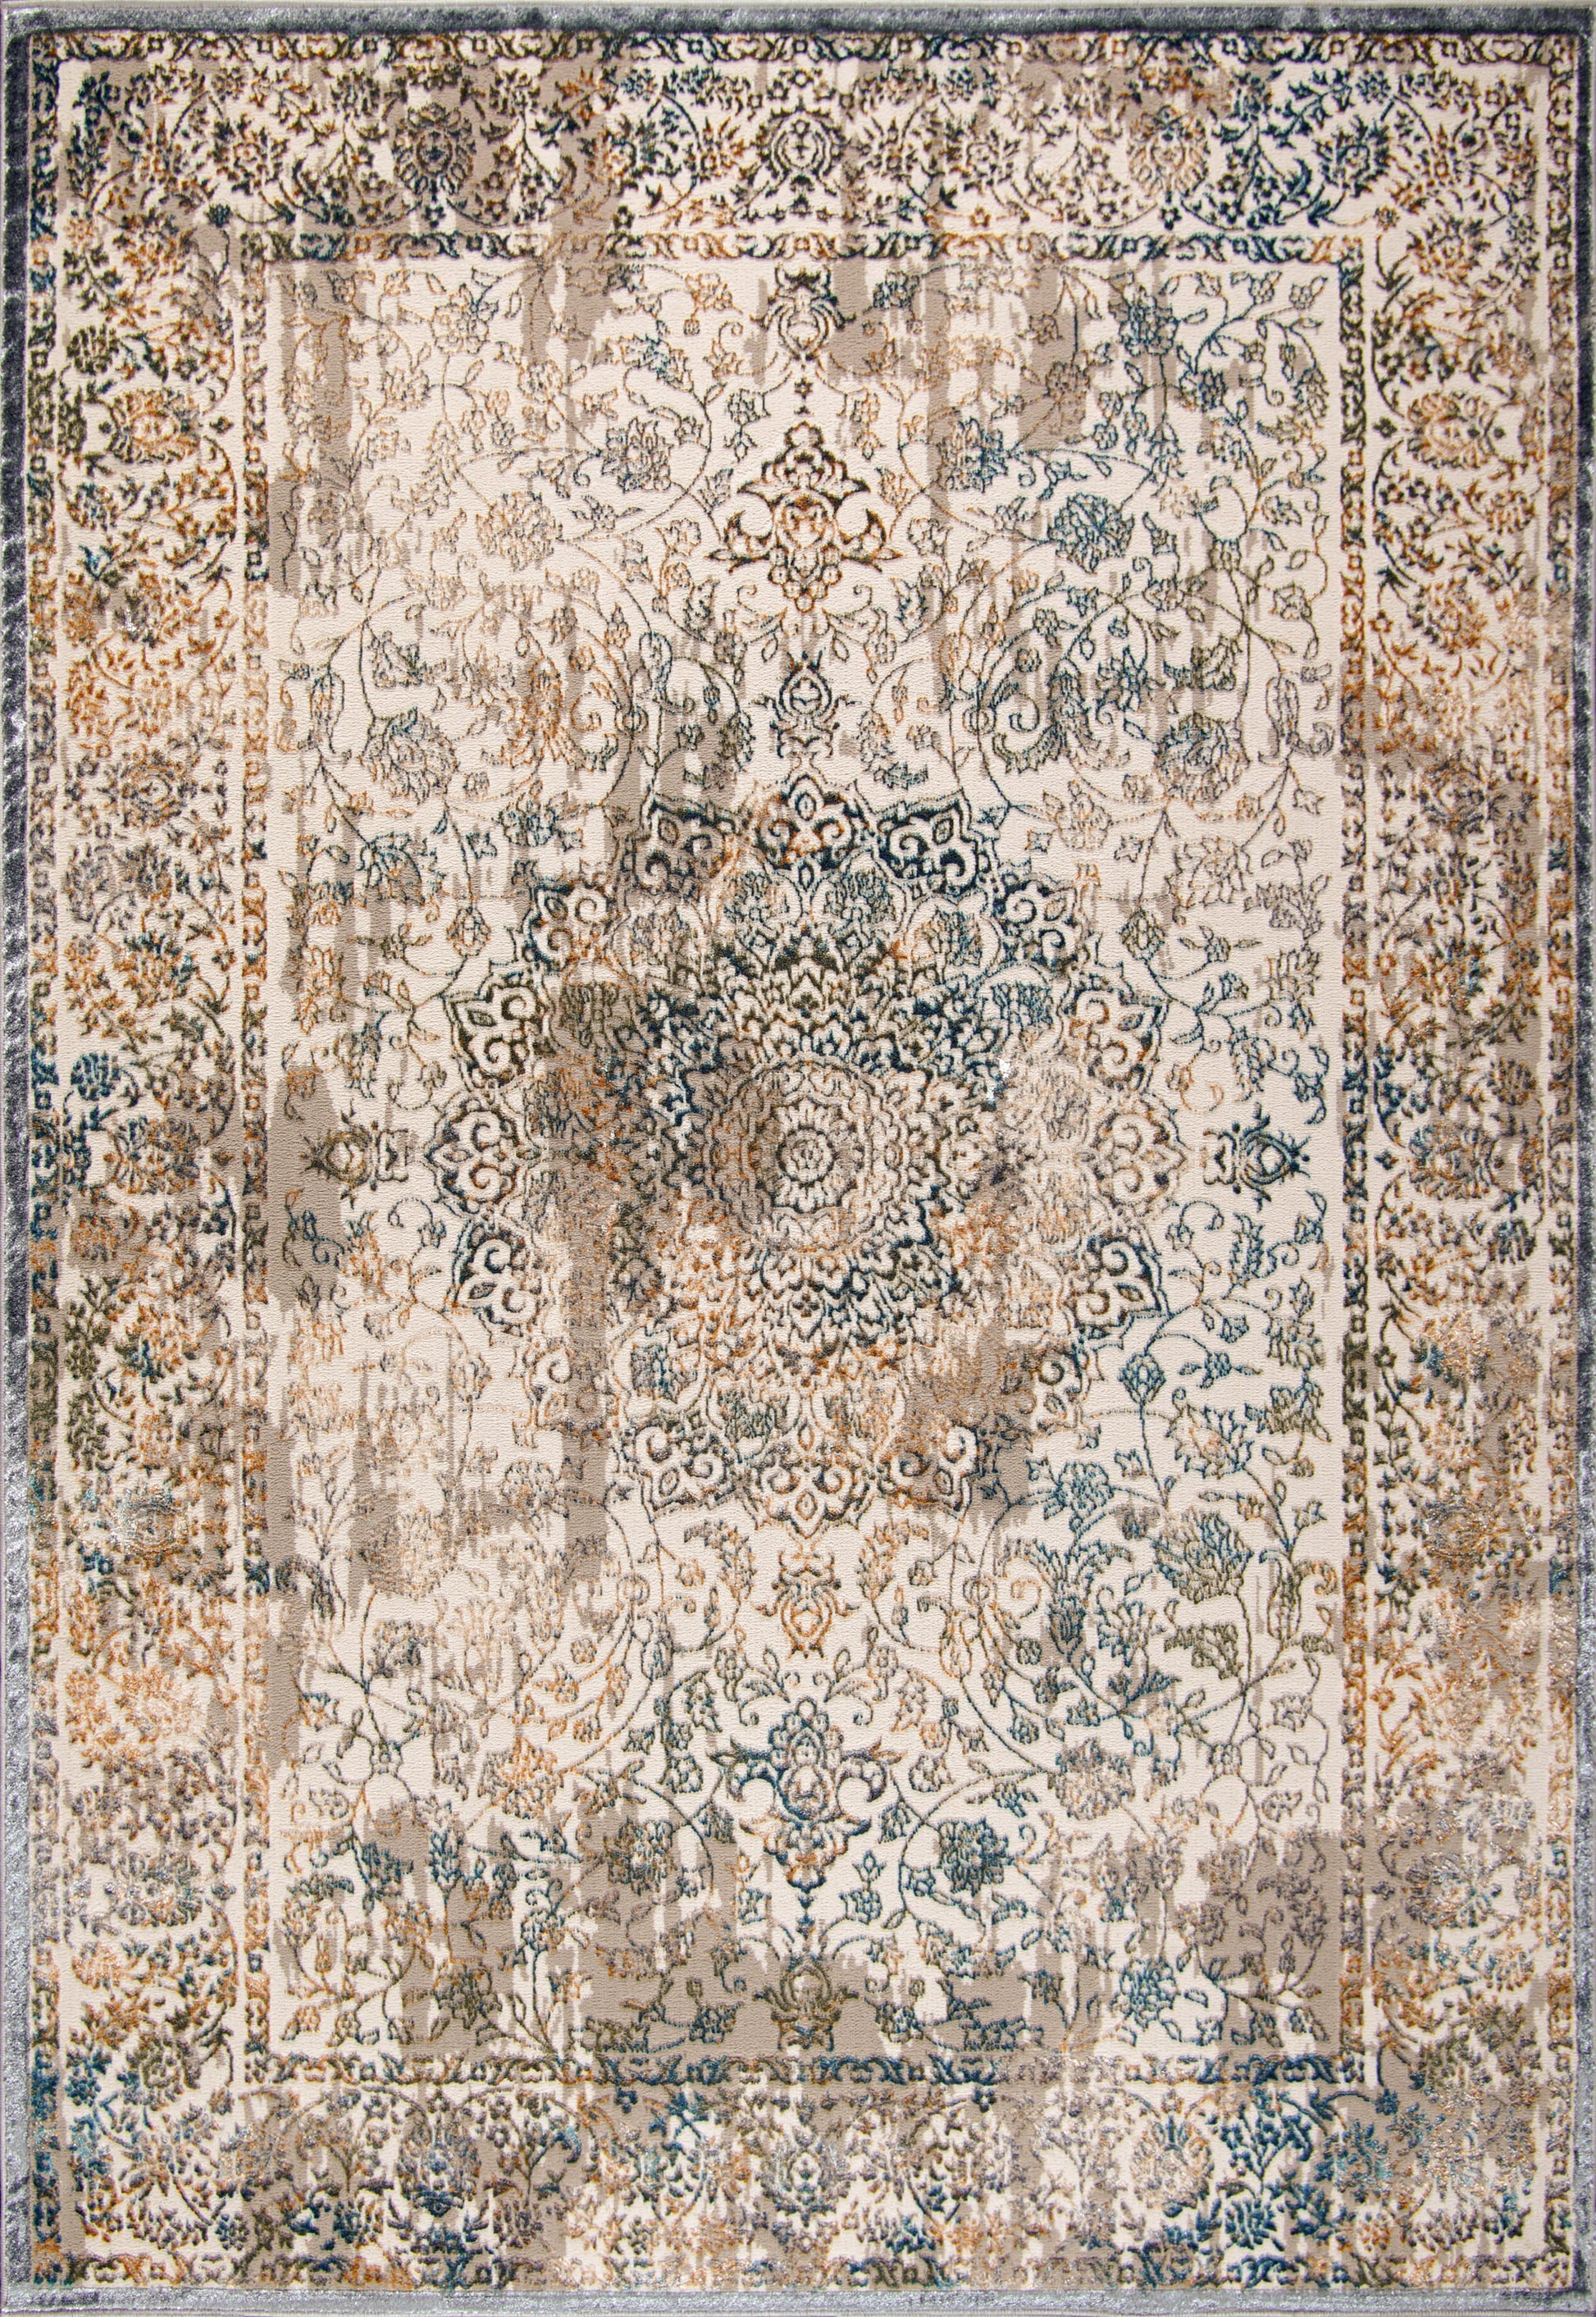 beige brown blue metalic traditional persian oriental contemporary area rug 2x8, 3x10, 2x10 ft Long Runner Rug, Hallway, Balcony, Entry Way, Kitchen, Stairs